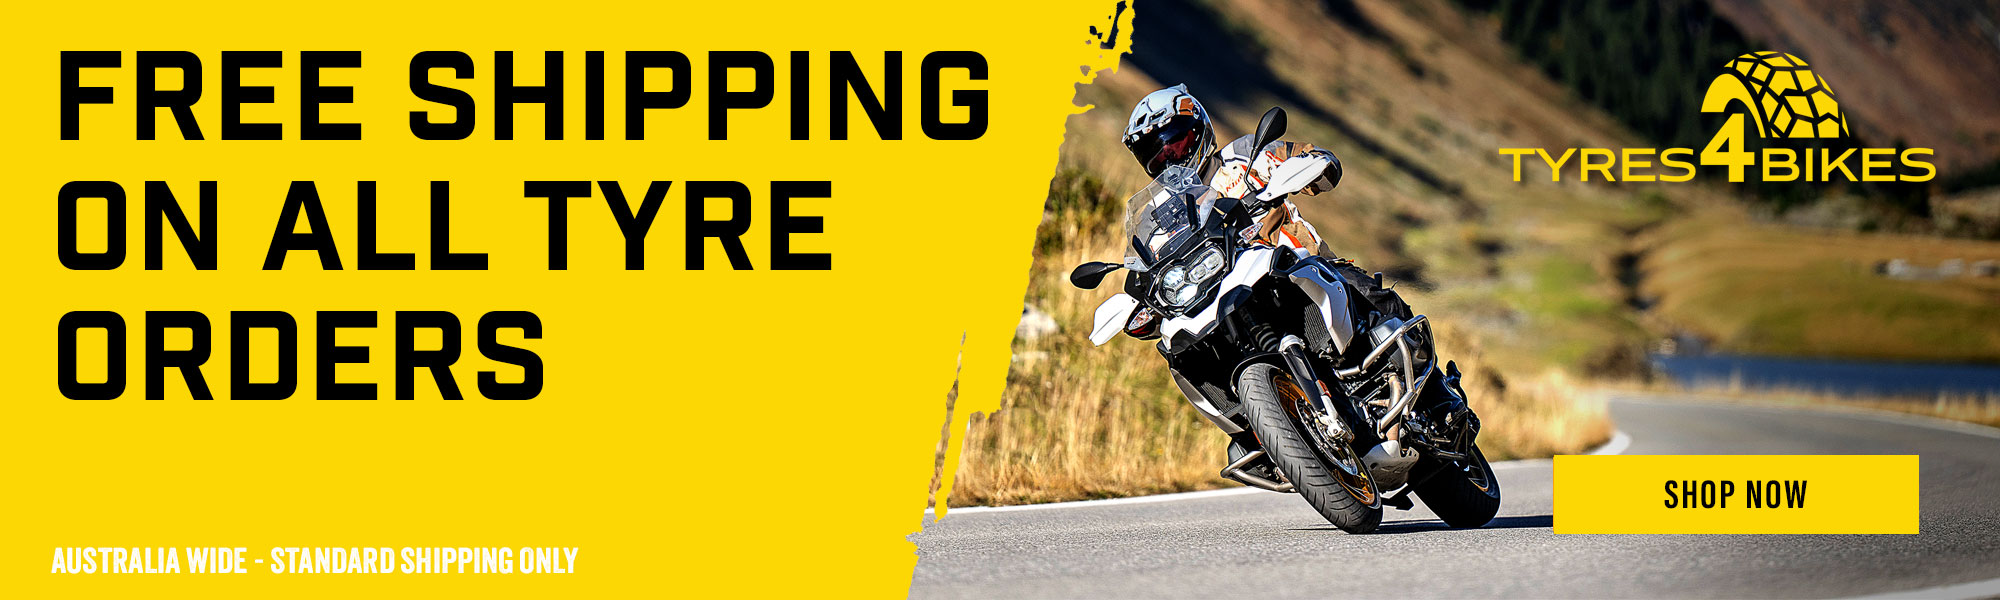 Free Shipping on Tyres Australia Wide